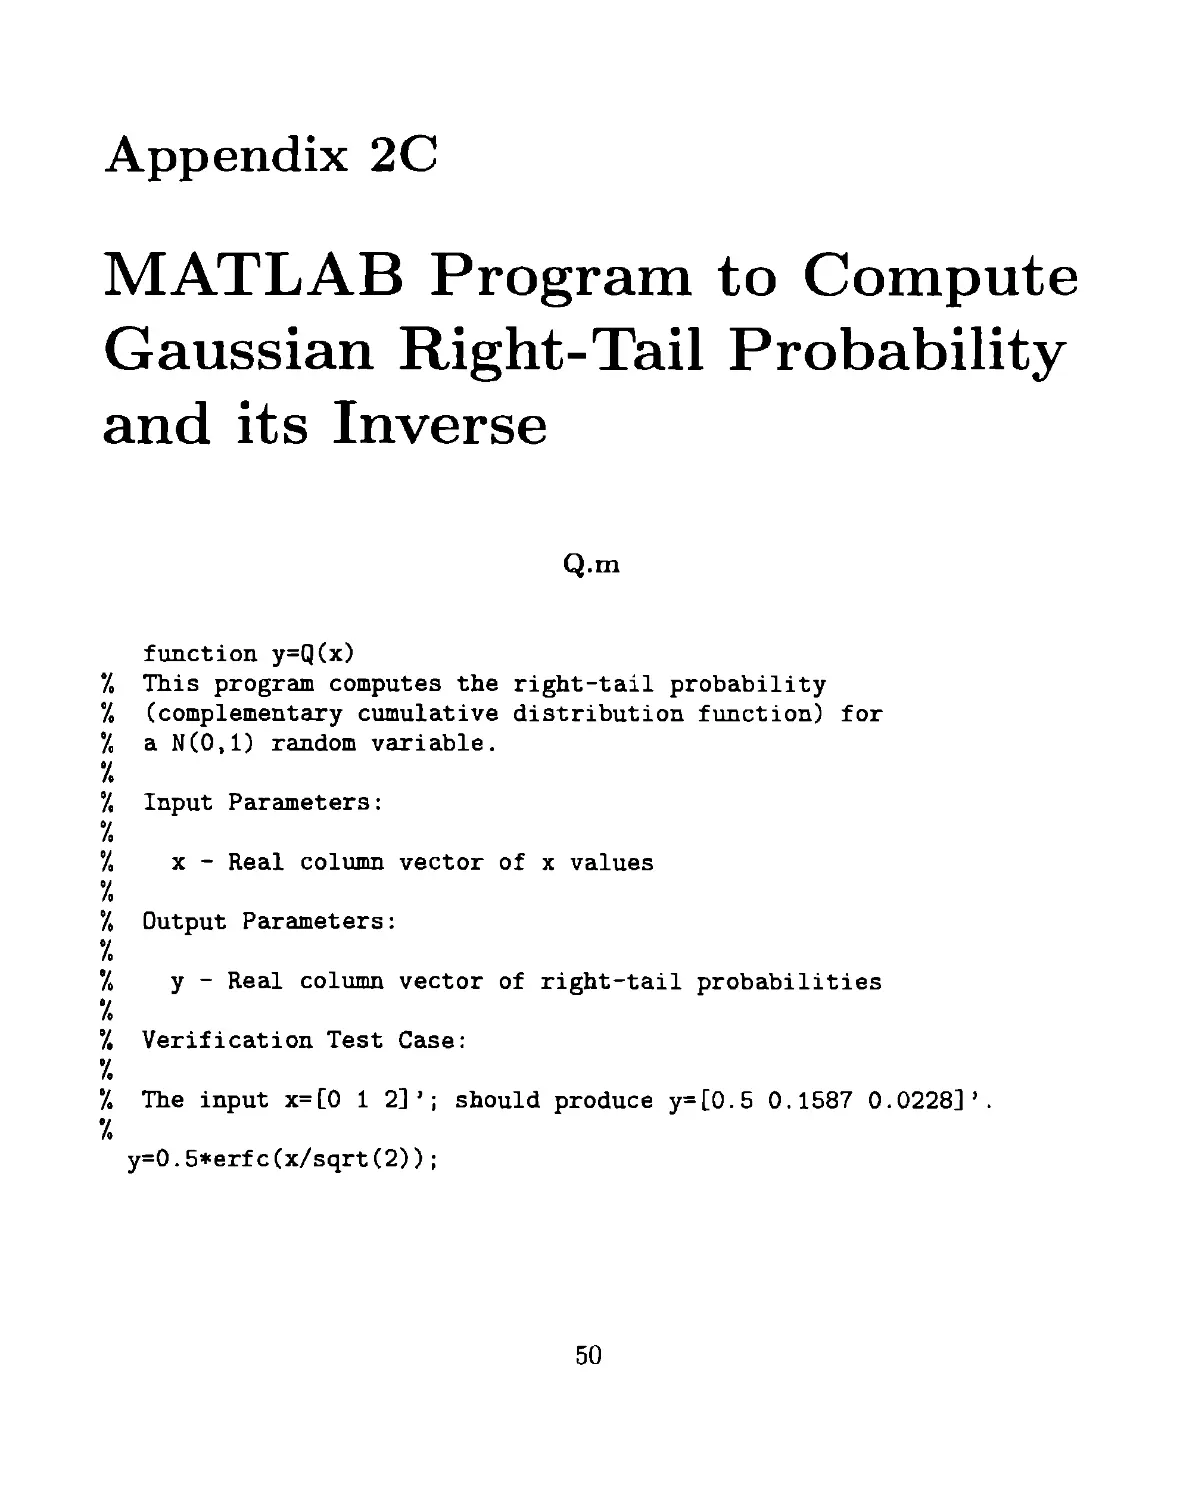 Appendix 2C MATLAB Program to Compute Gaussian Right-Tail Probability and its Inverse